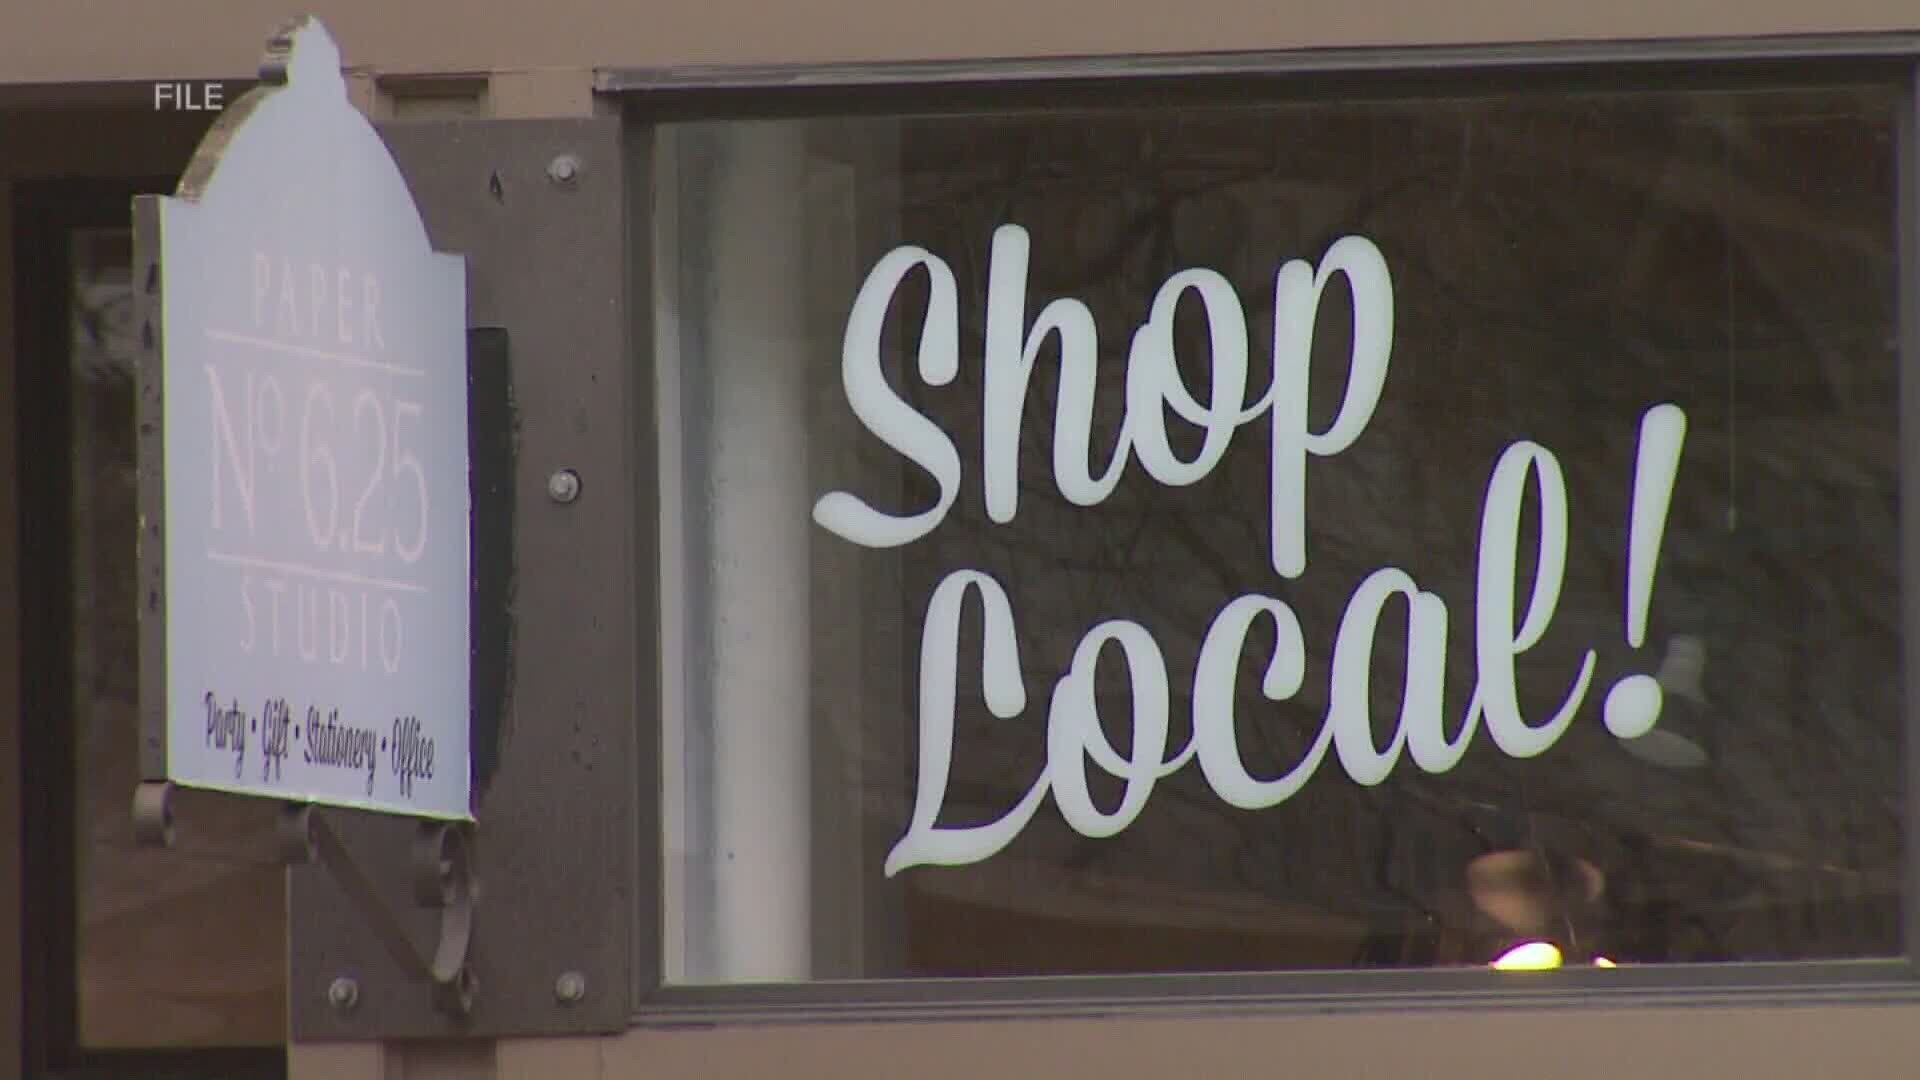 The Michigan Economic Development Corp. is encouraging shopping, eating and traveling locally through a new “Support Local” campaign.